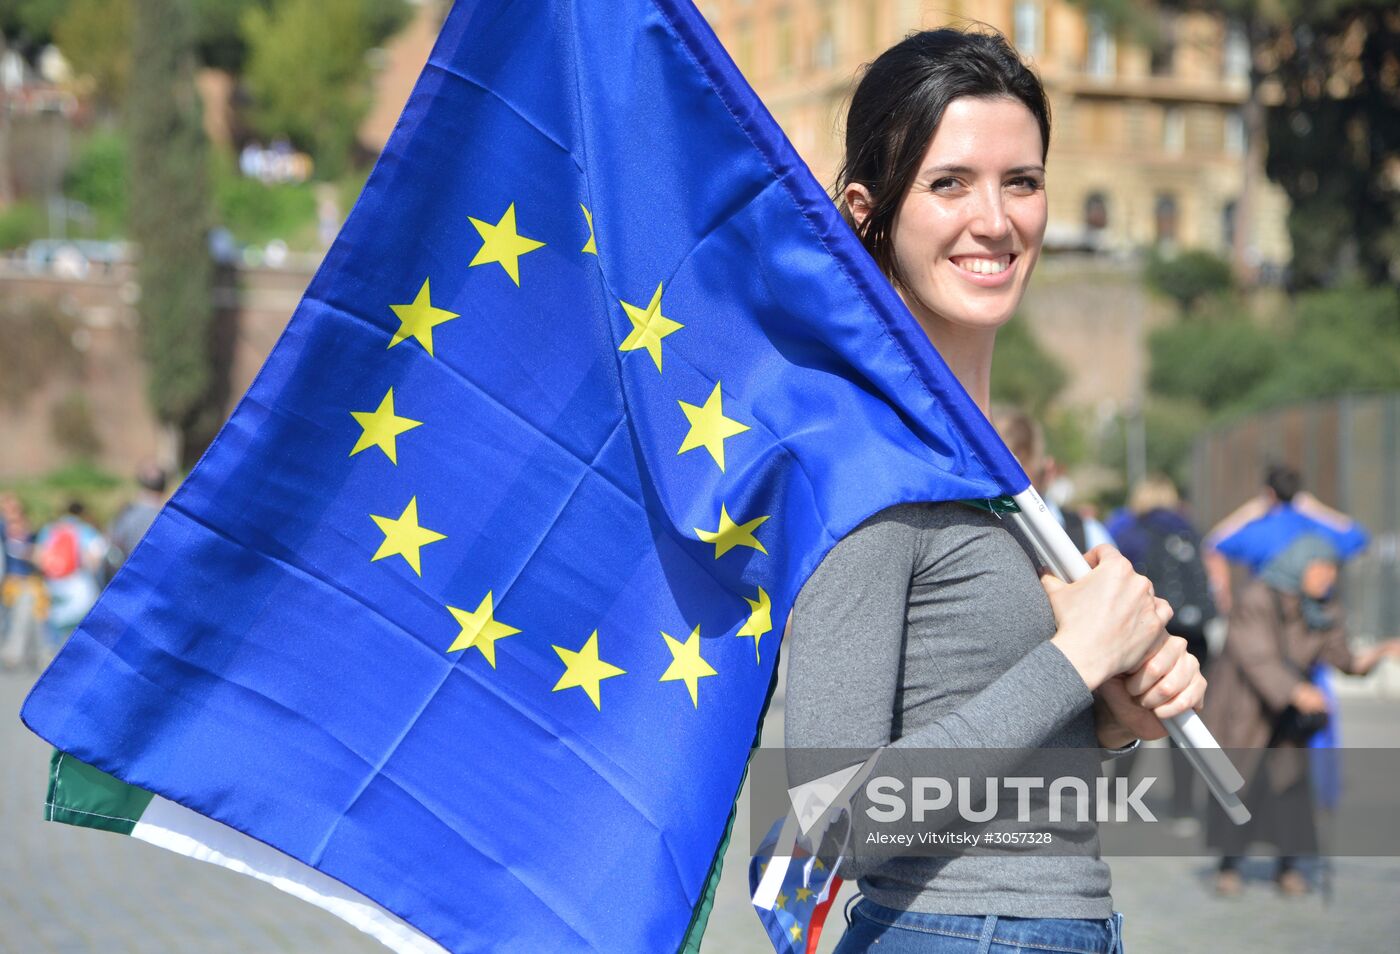 EU supporters rally in Rome